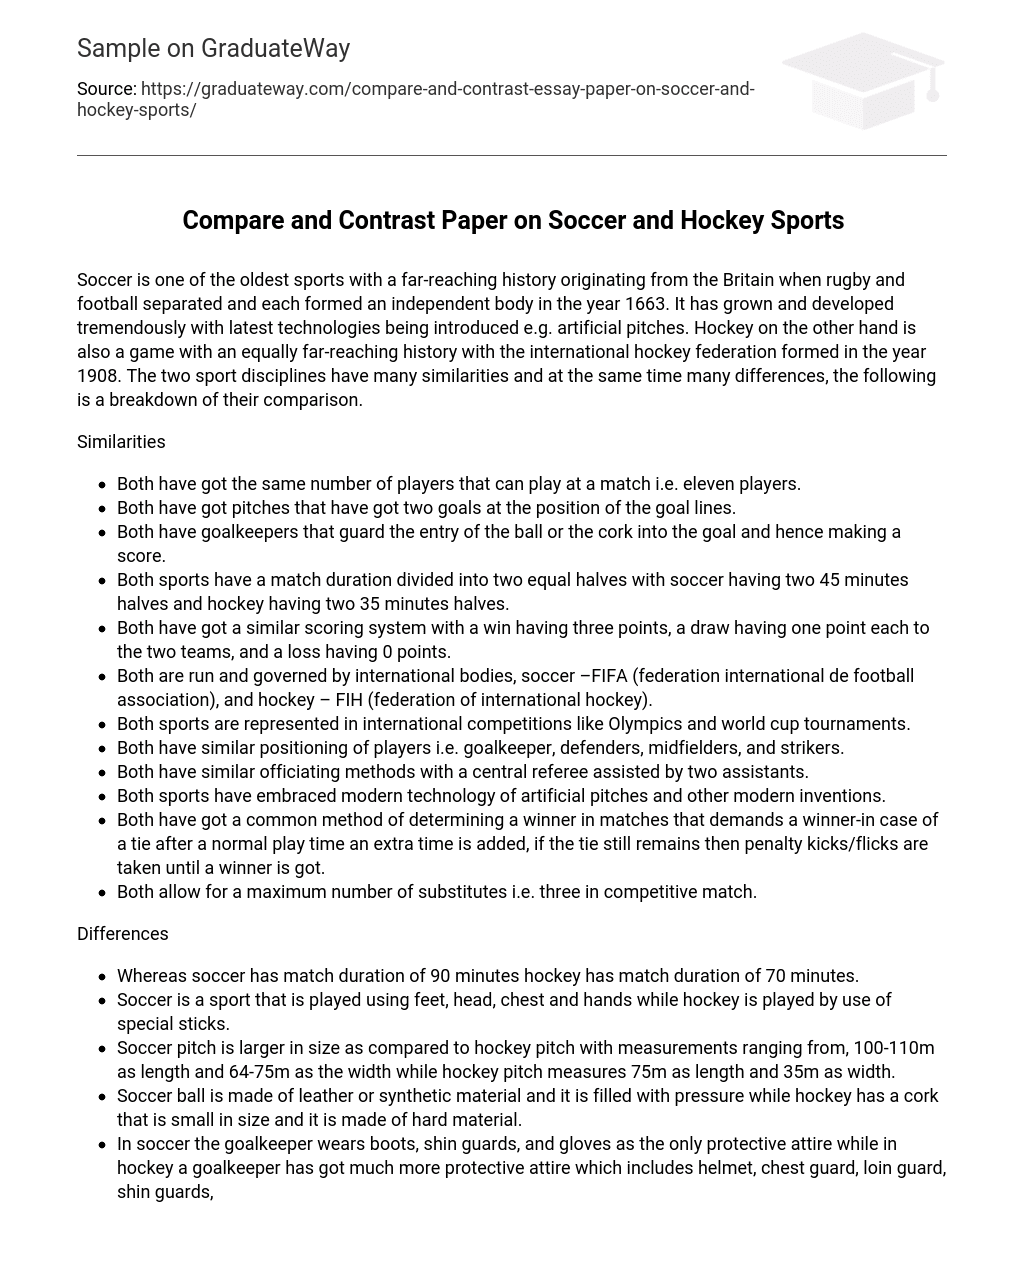 Compare and Contrast Paper on Soccer and Hockey Sports